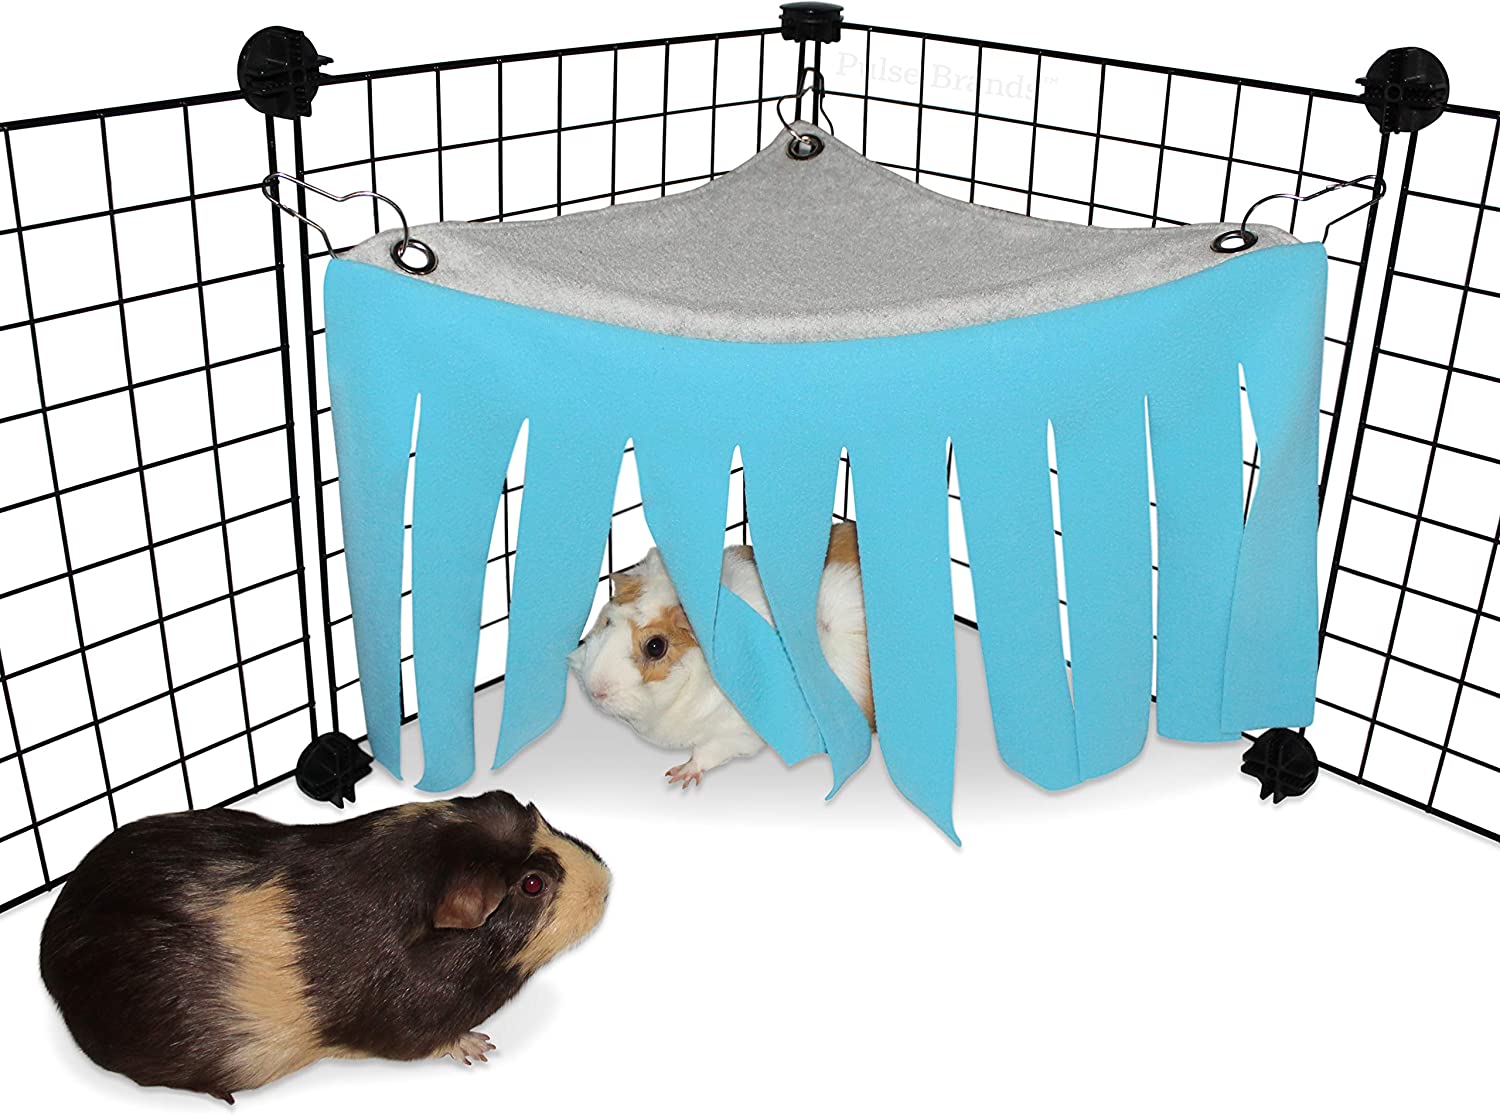 Hamster,Rats Bunny & Other Small Animals Without Metal Fences Ferrets CROWNY Guinea Pig Hideout Chinchillas Corner Fleece Forest Hideaway for Guinea Pigs 